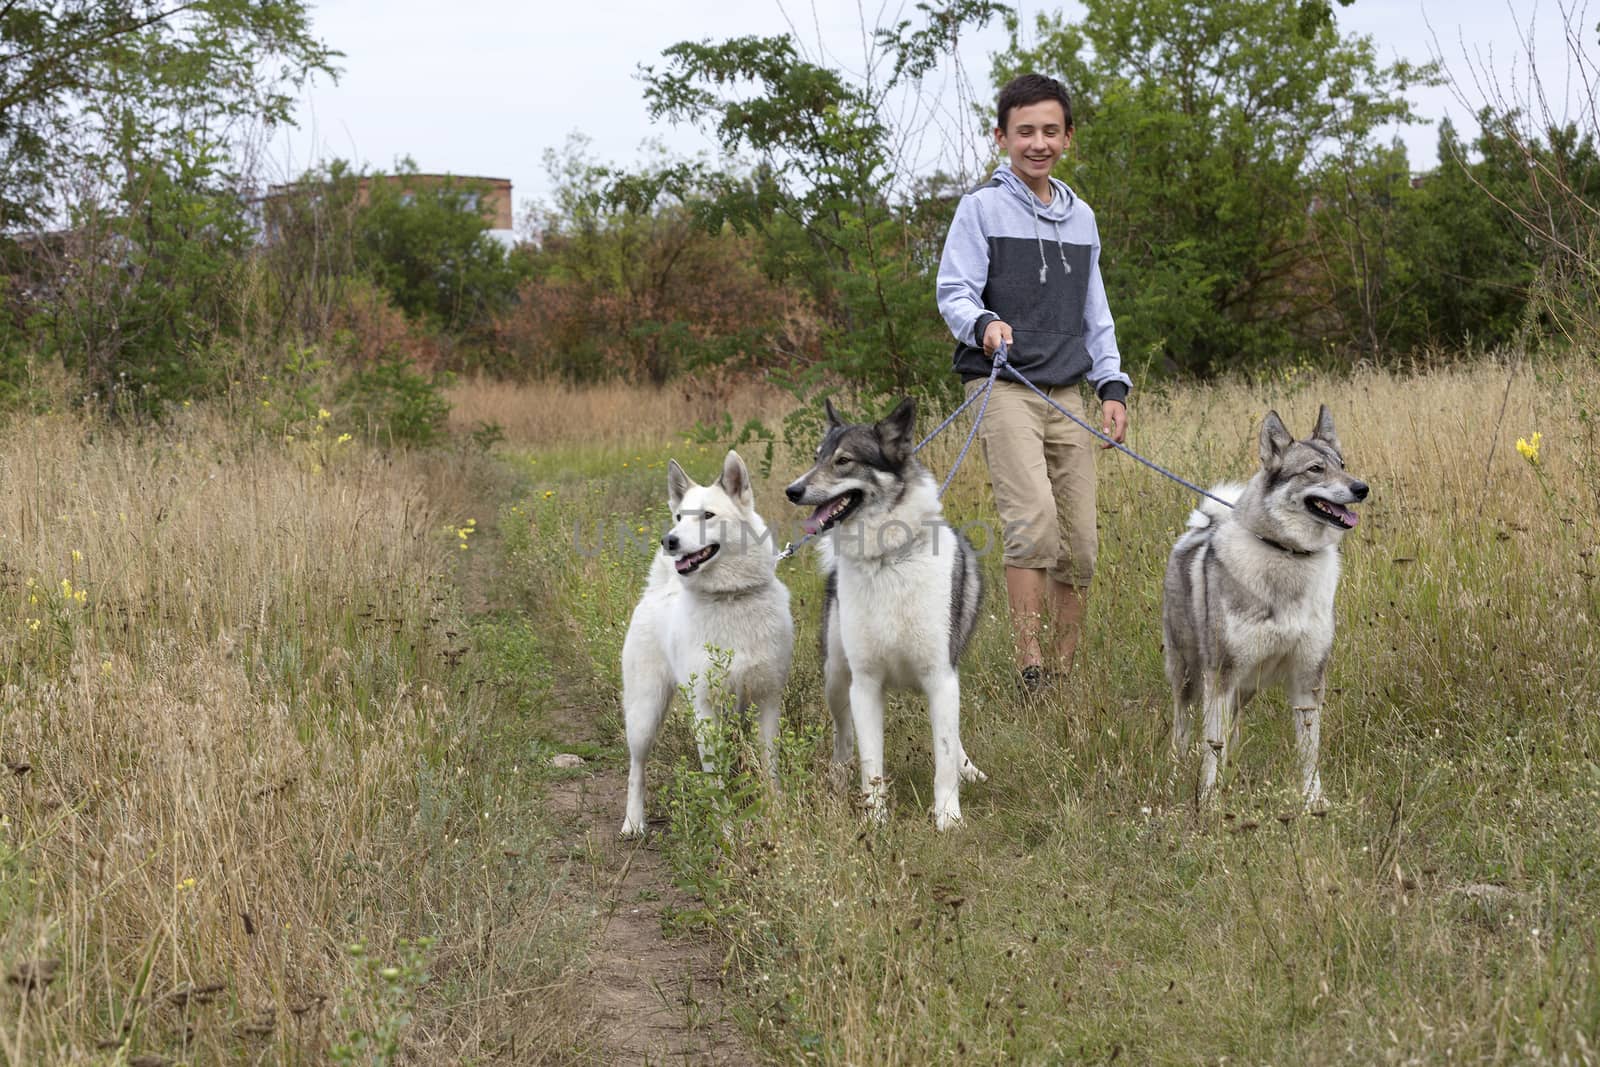 Three Hunting Dog Siberian Laika on leashes go for a walk. One dog is completely white, the second is black with white, the third is gray.